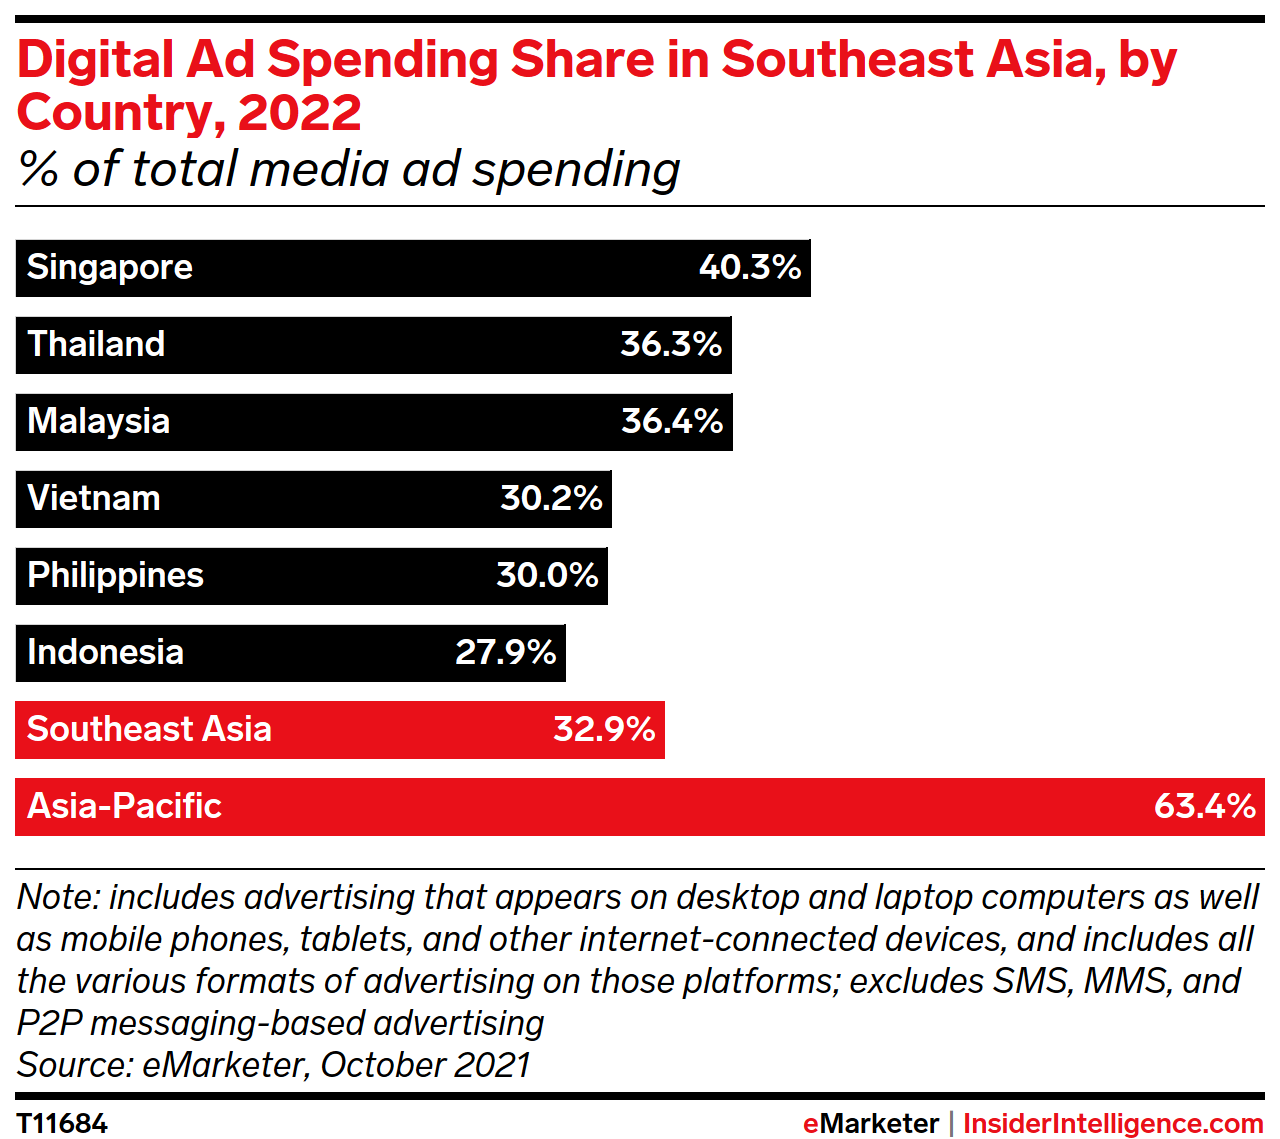 Digital Ad Spending Share in Southeast Asia, by Country, 2022 (% of total media ad spending)